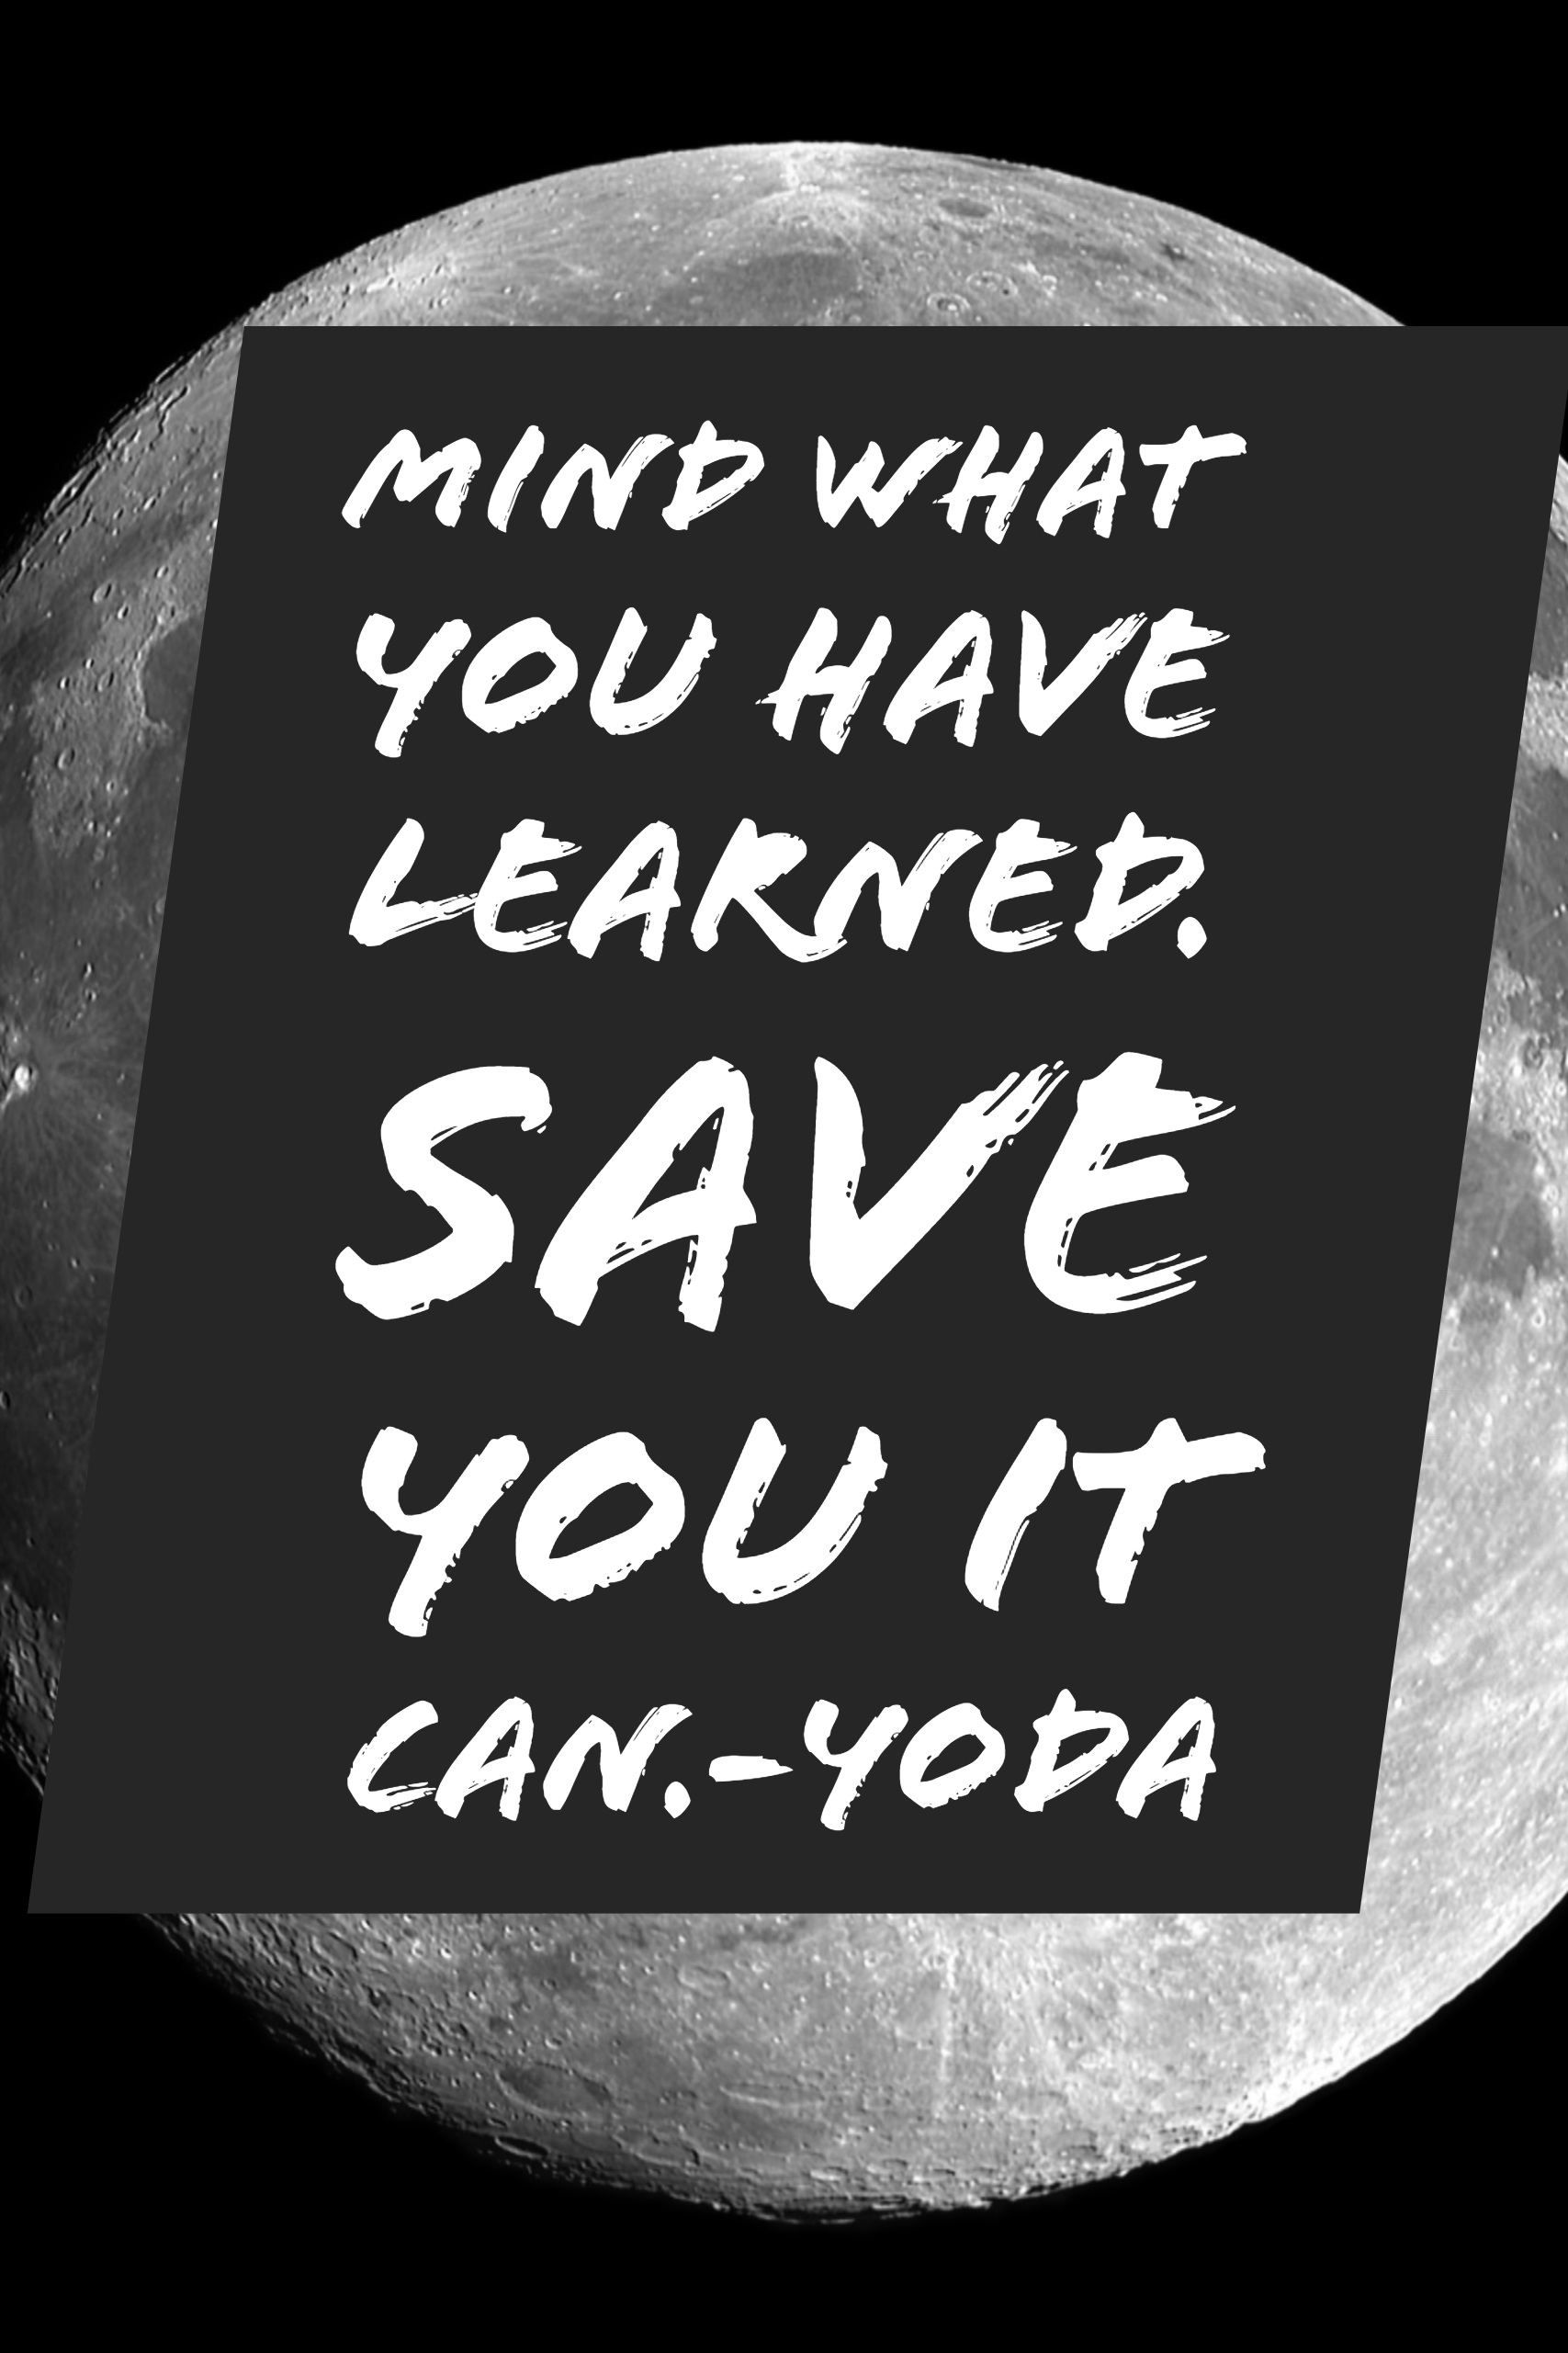 Mind what you have learned. Save you it can. -yoda